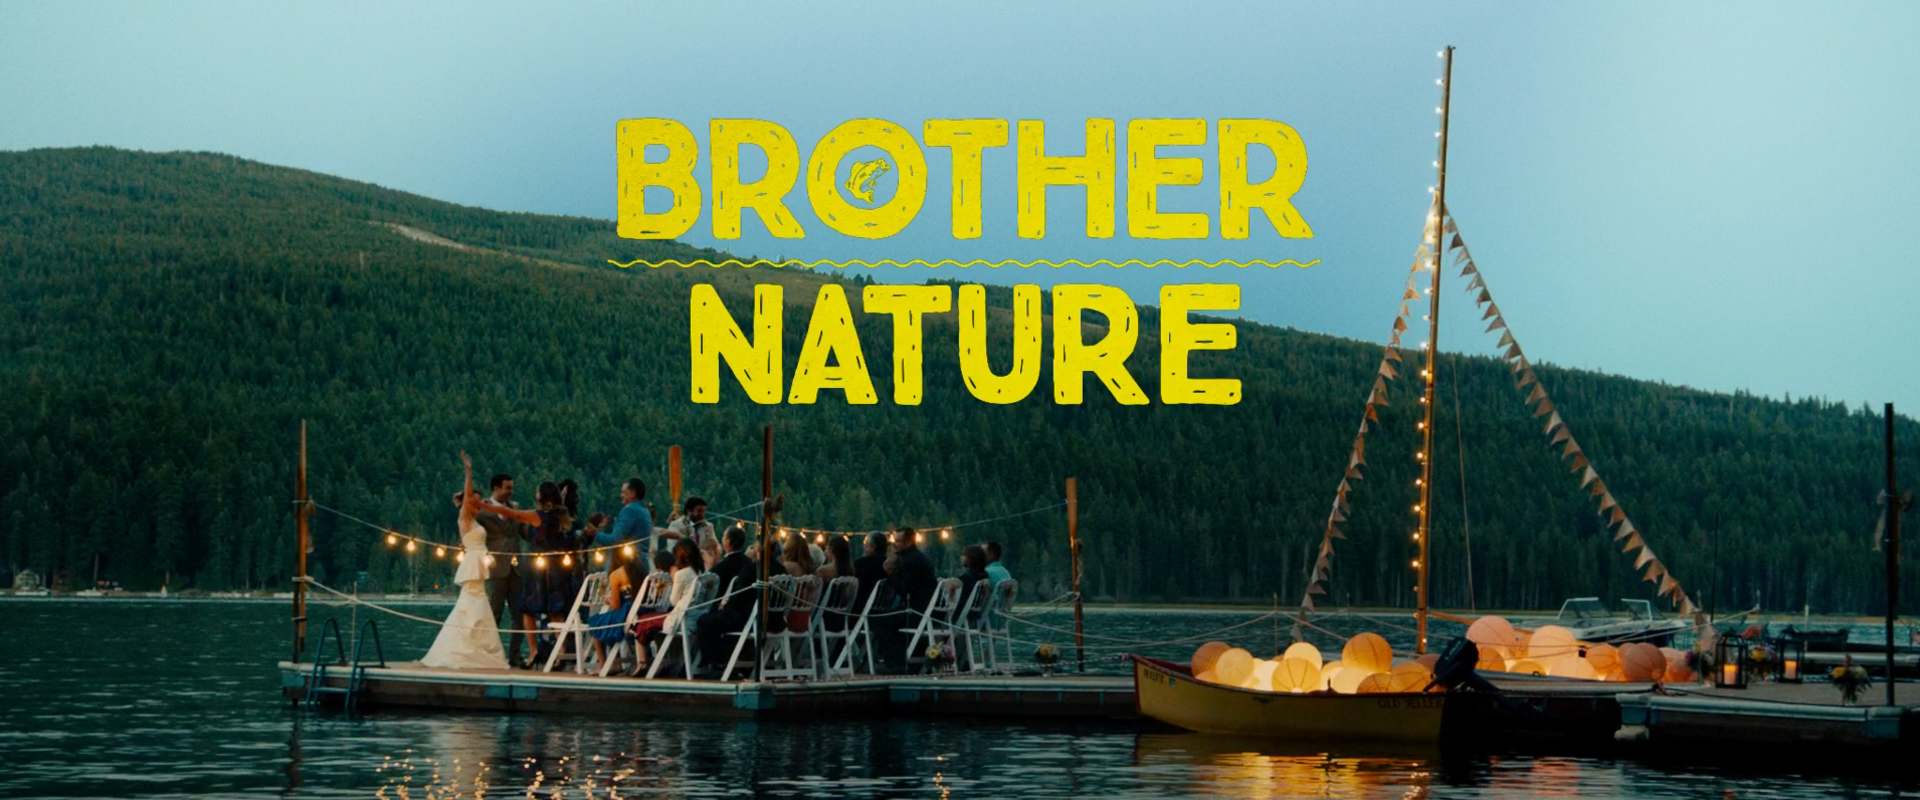 Brother Nature background 2